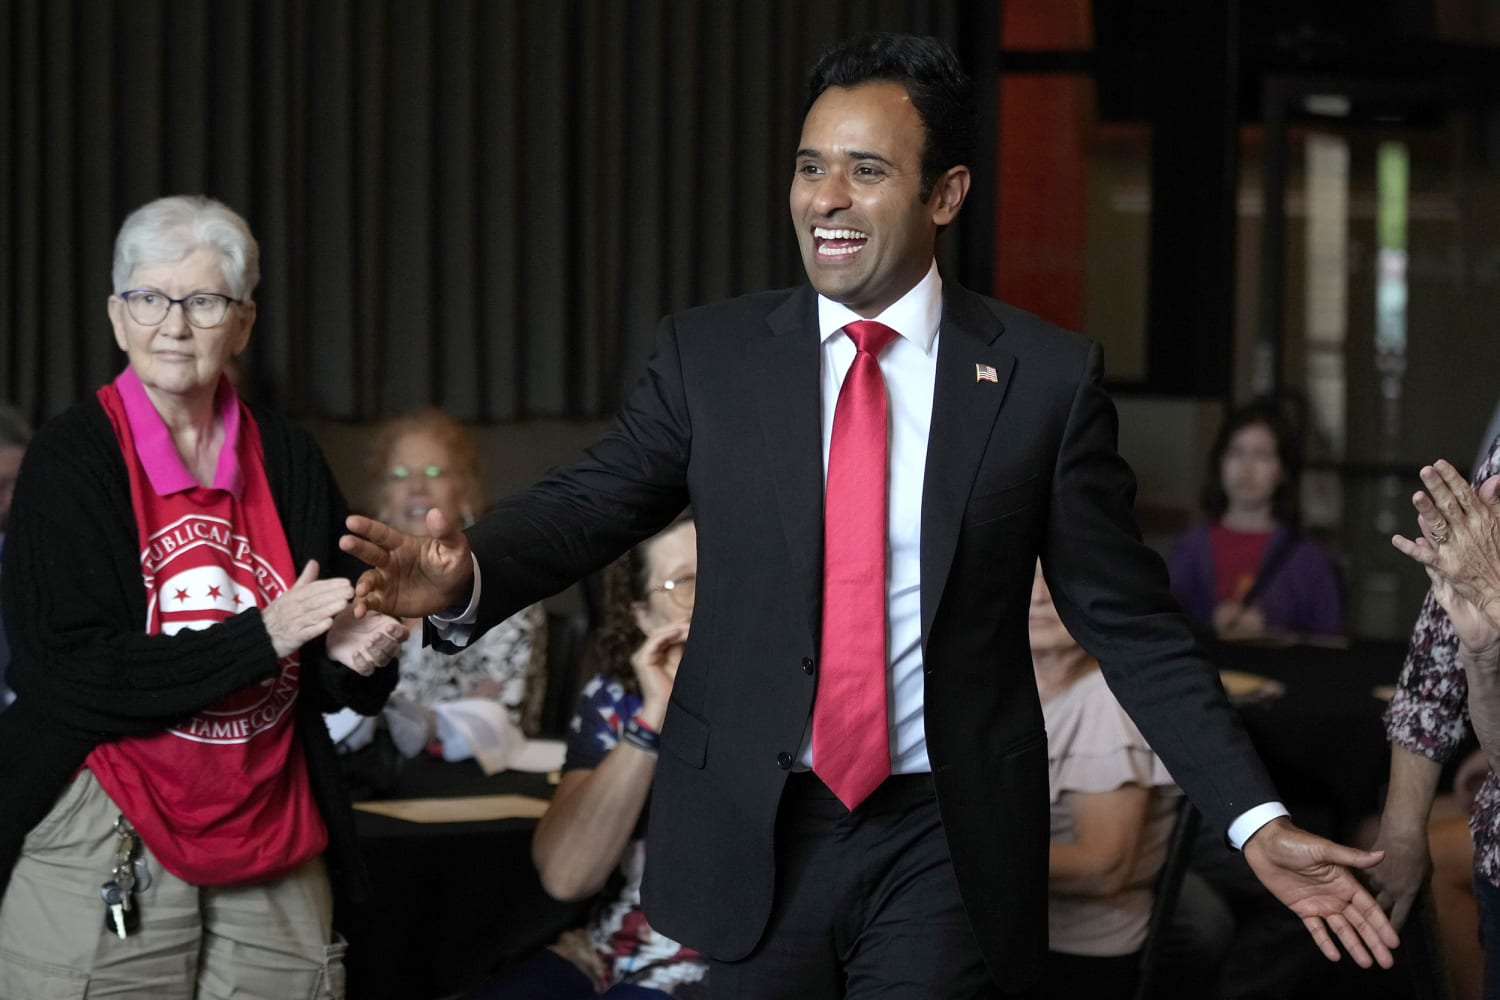 Vivek Ramaswamy’s zinger-fueled campaign meets the Iowa grind